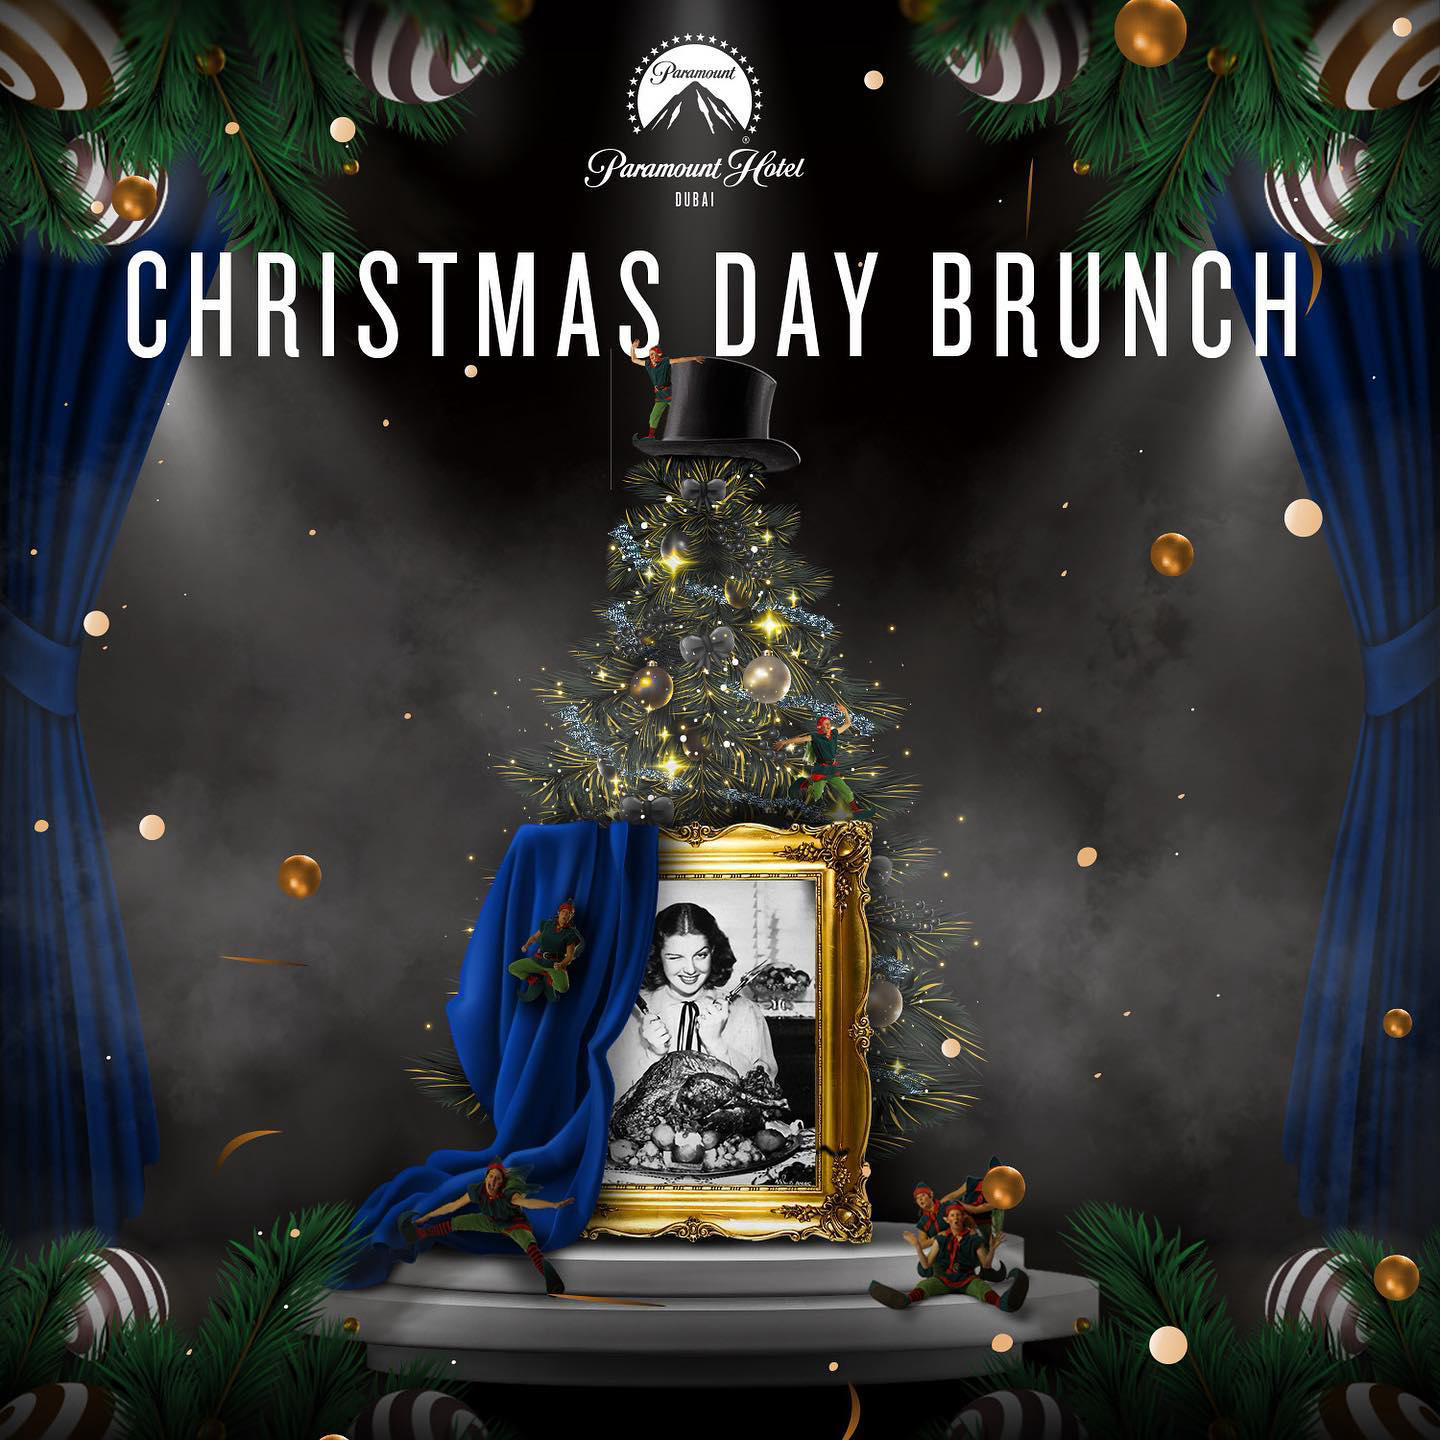 image  1 Paramount Hotel Dubai - Join us for the only Paramount Christmas Production Day Brunch and Show at T